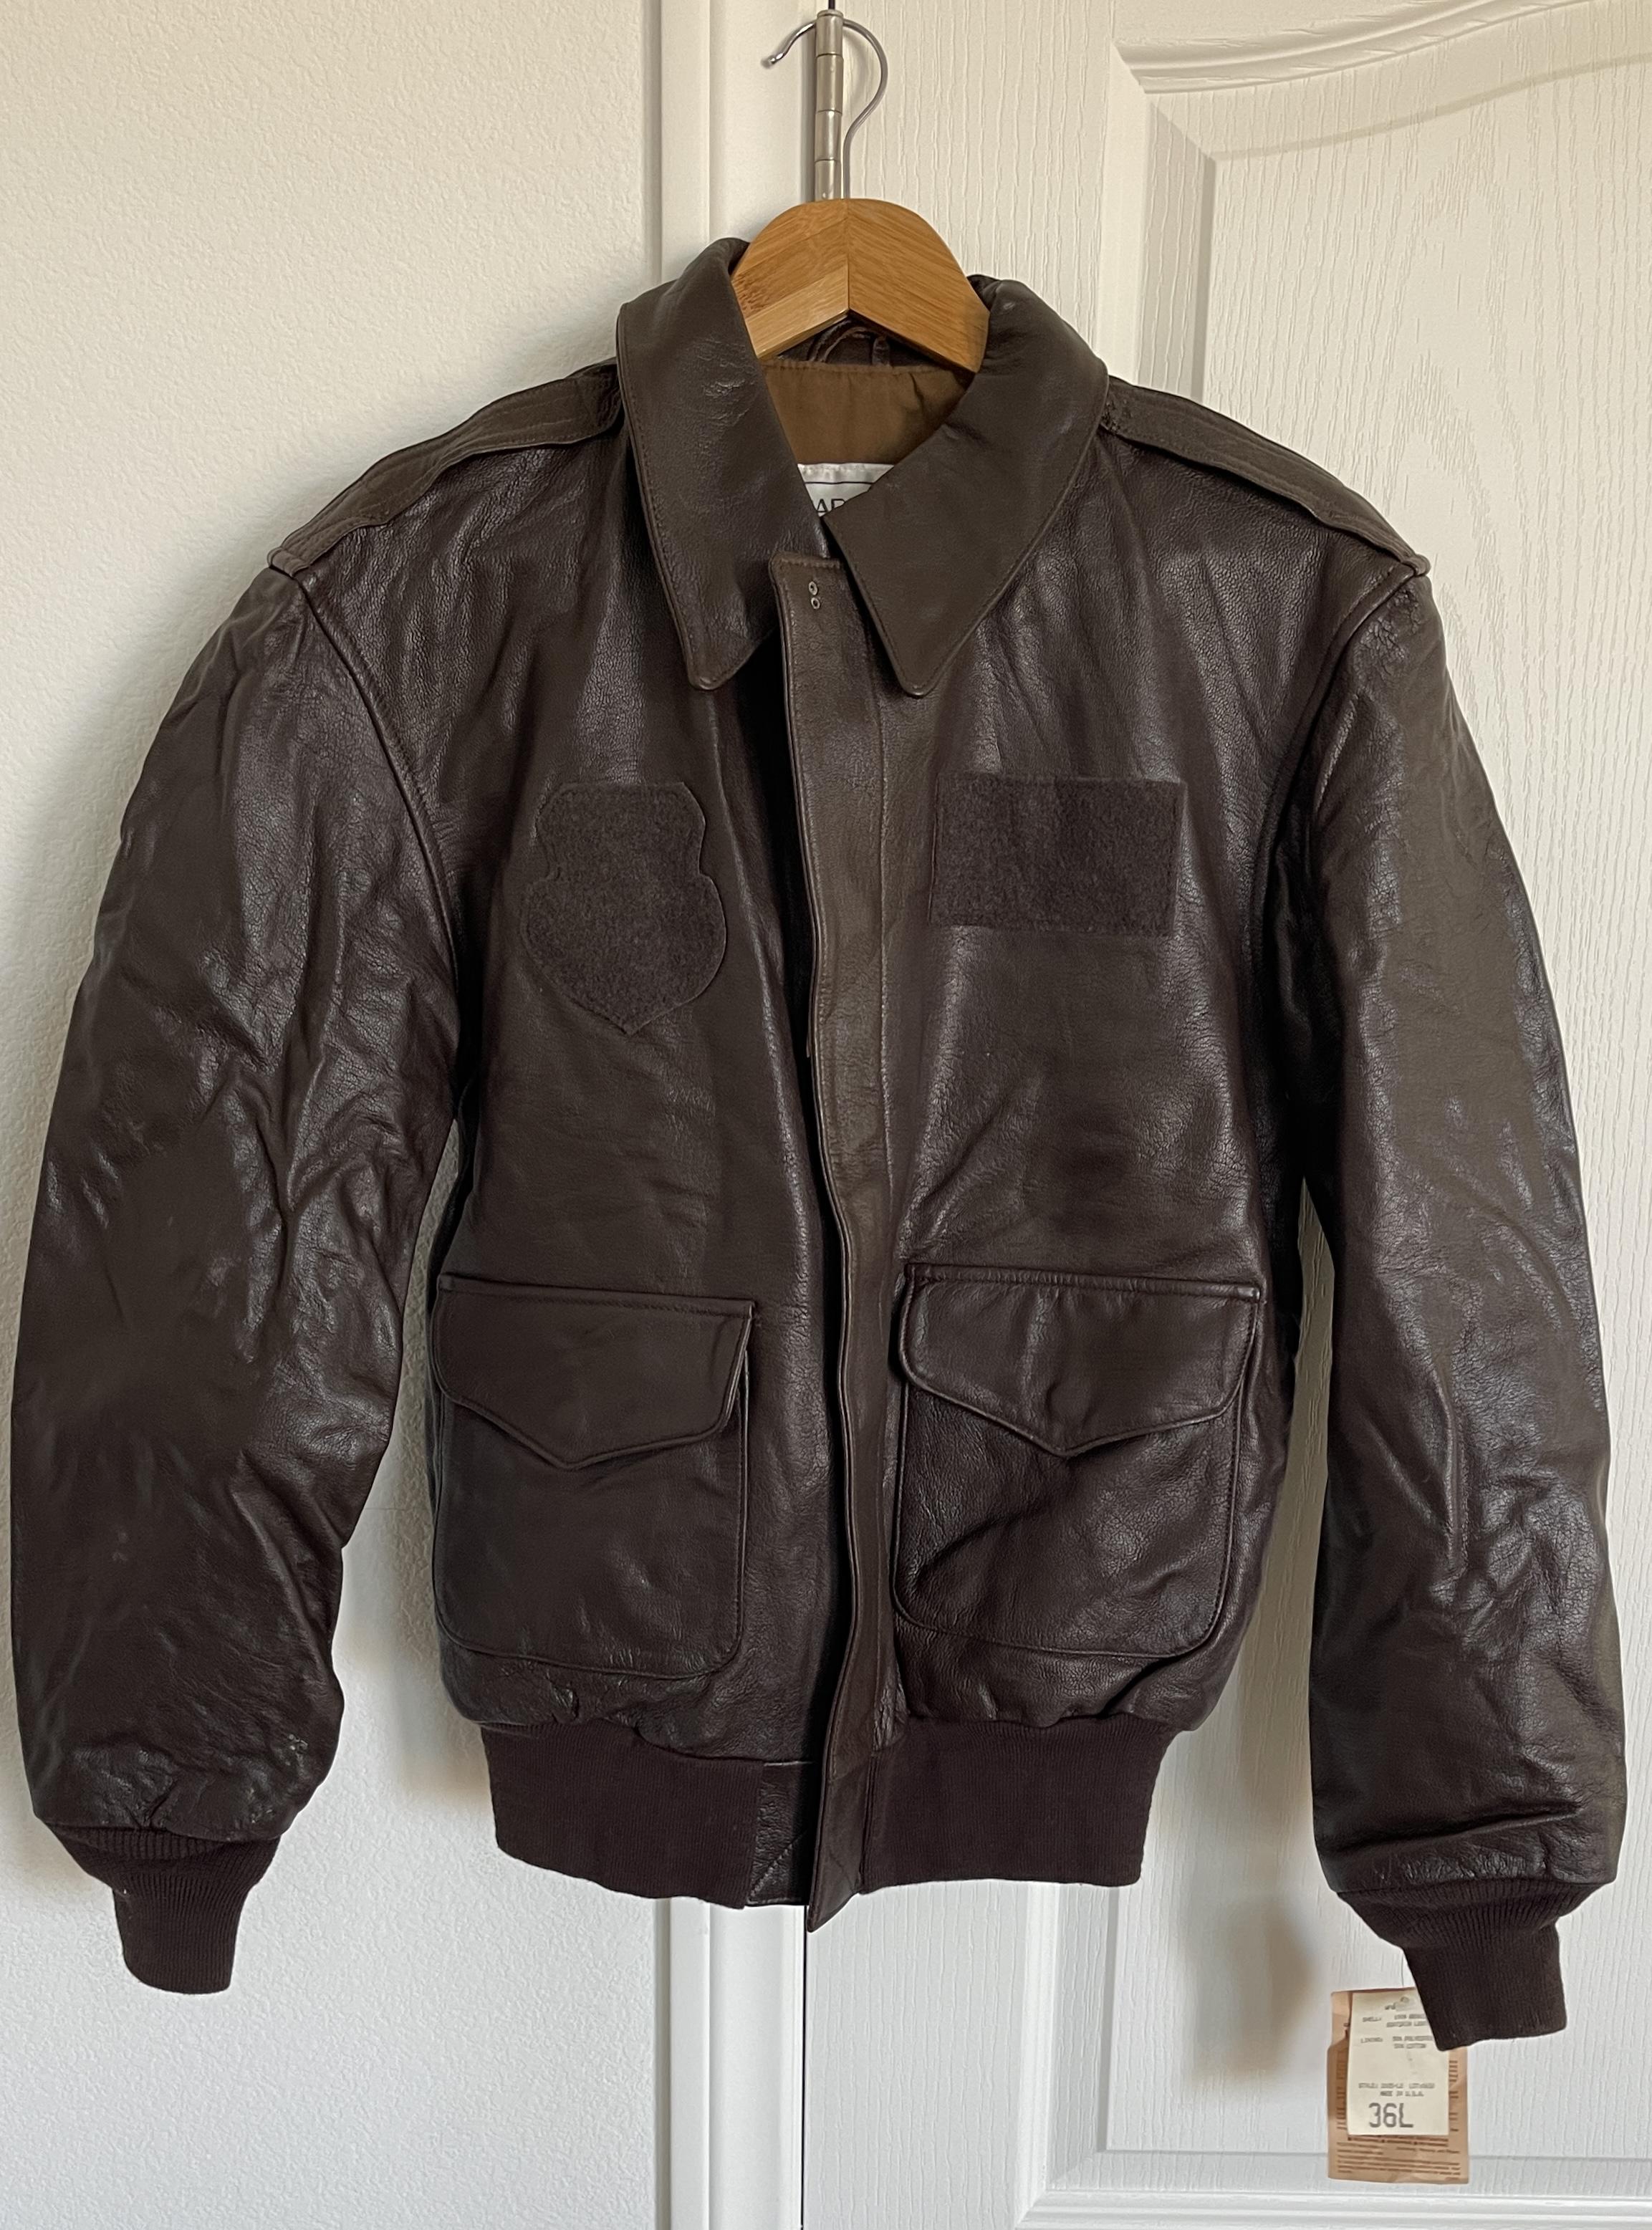 WTT 36L Issue A-2 Jacket for smaller 34R or 34S Issue A-2 Jacket ...